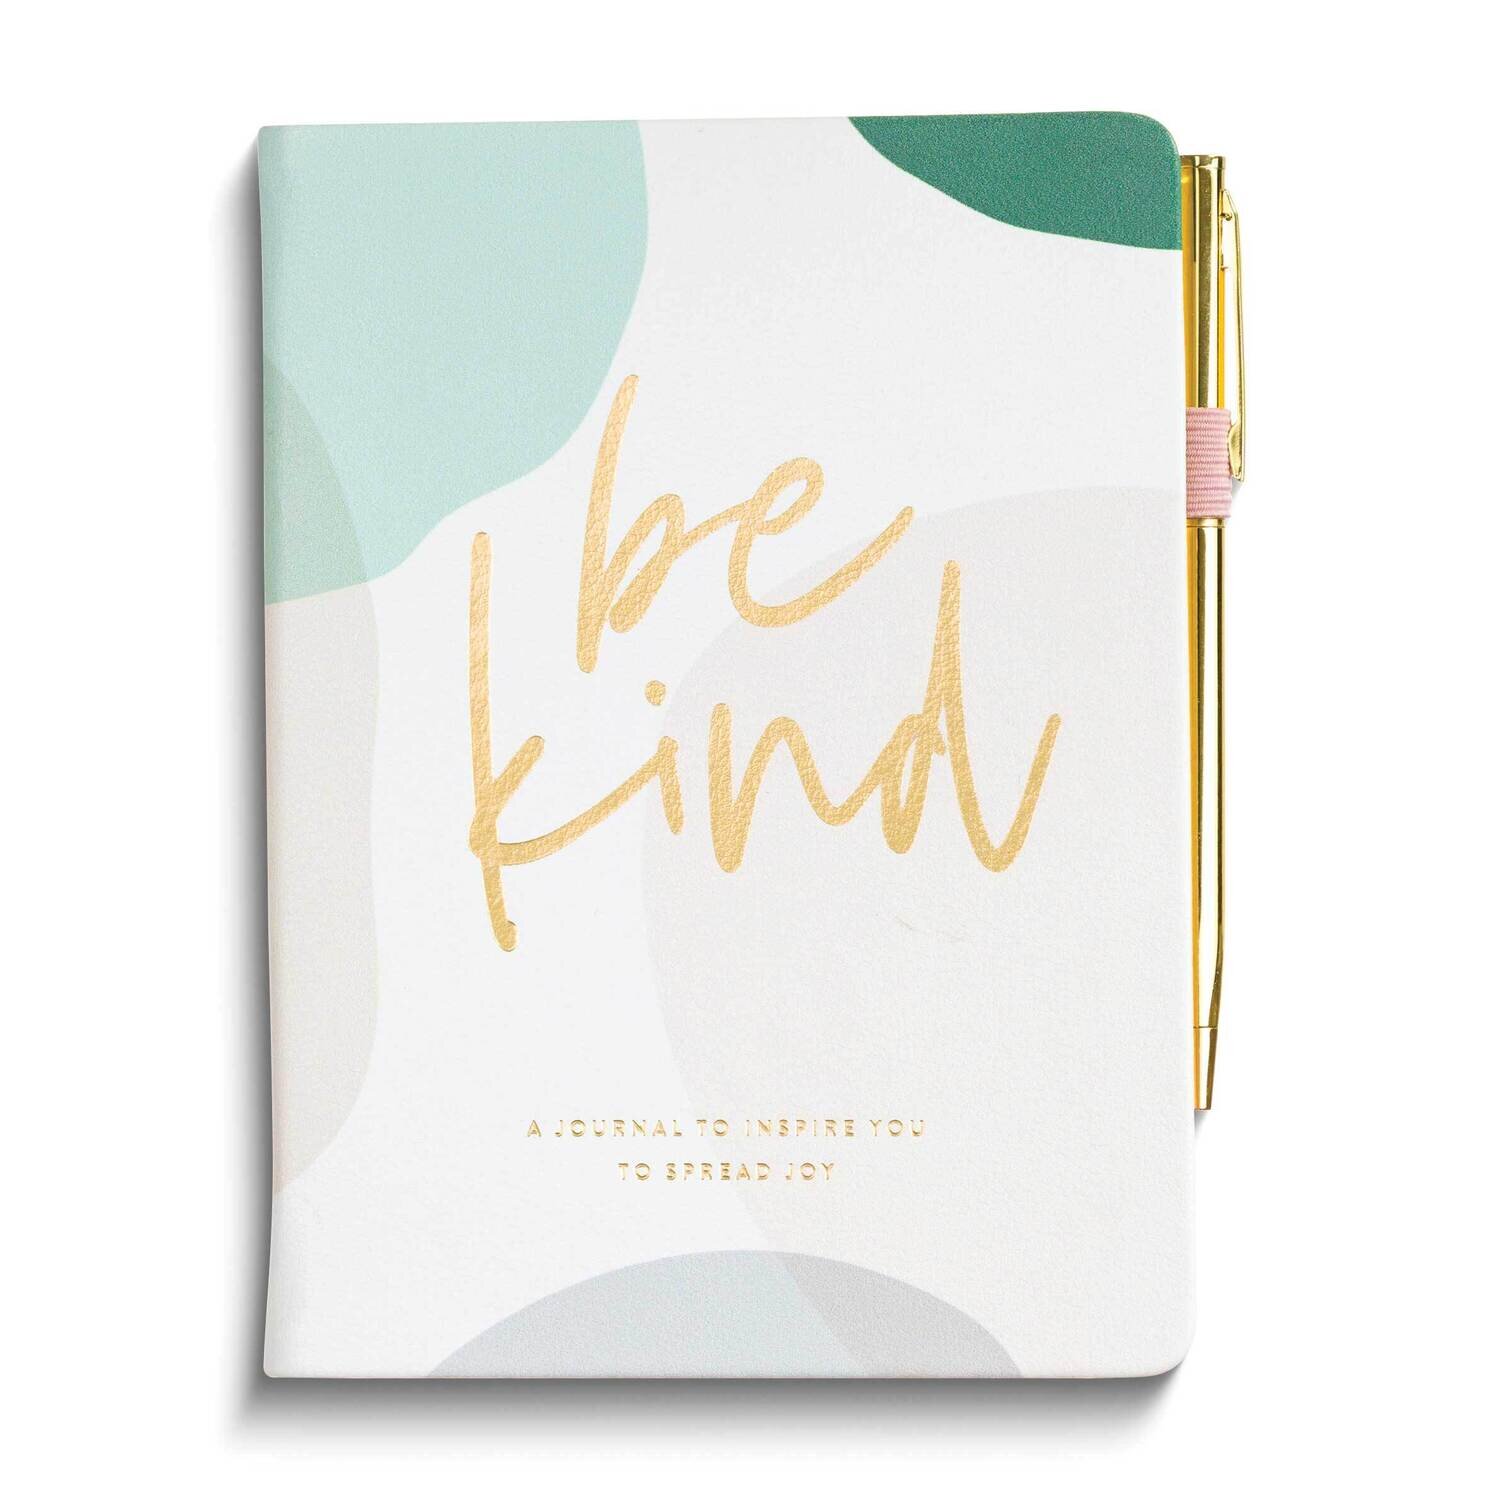 Green and White 5x7 Inch BE KIND with Pen Guided Journal GM24471